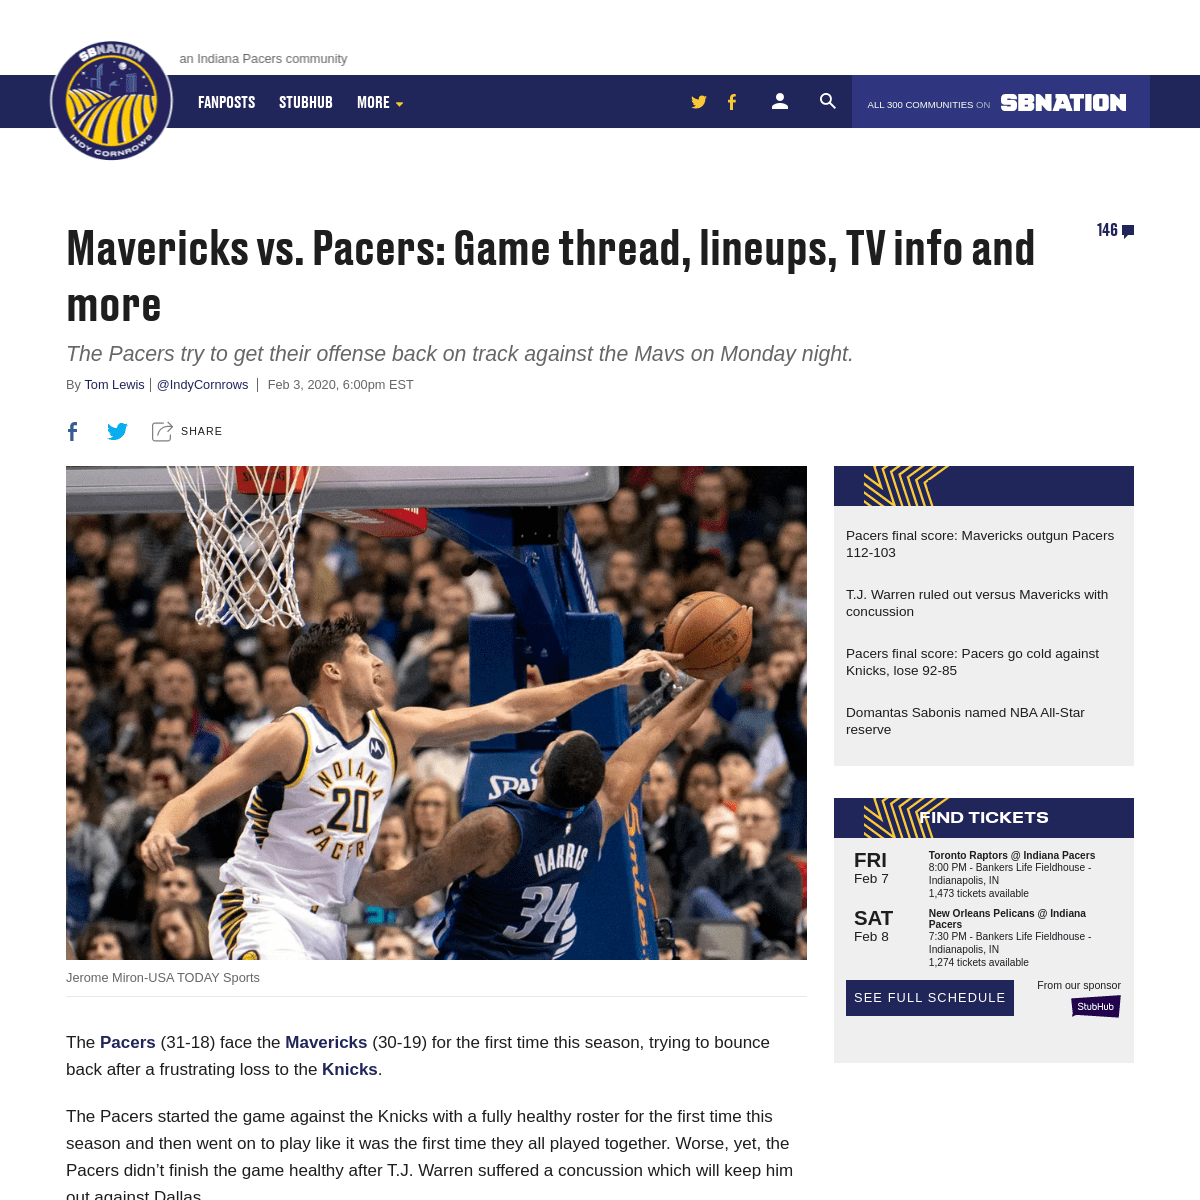 A complete backup of www.indycornrows.com/2020/2/3/21120001/mavericks-vs-pacers-game-thread-lineups-tv-info-and-more-oladipo-luk